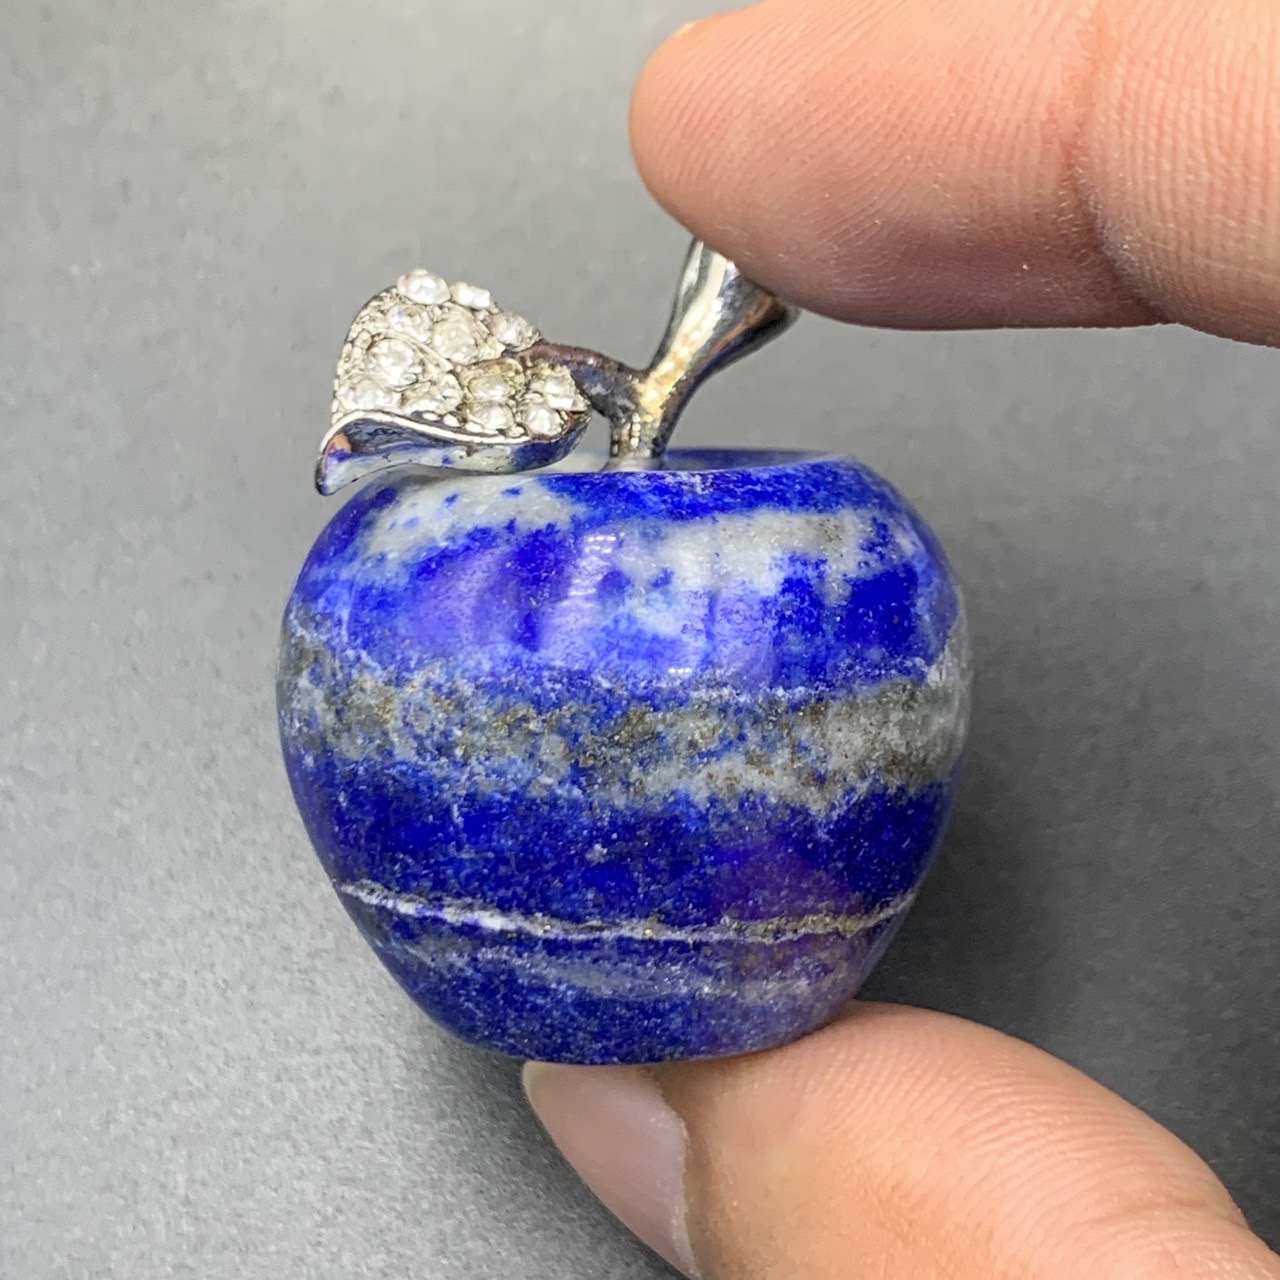 215.20 Cts Awesome Afghani Natural Lapis Lazuli With CZ & Stainless Steel Apple. LPZ-31 - Image 5 of 6